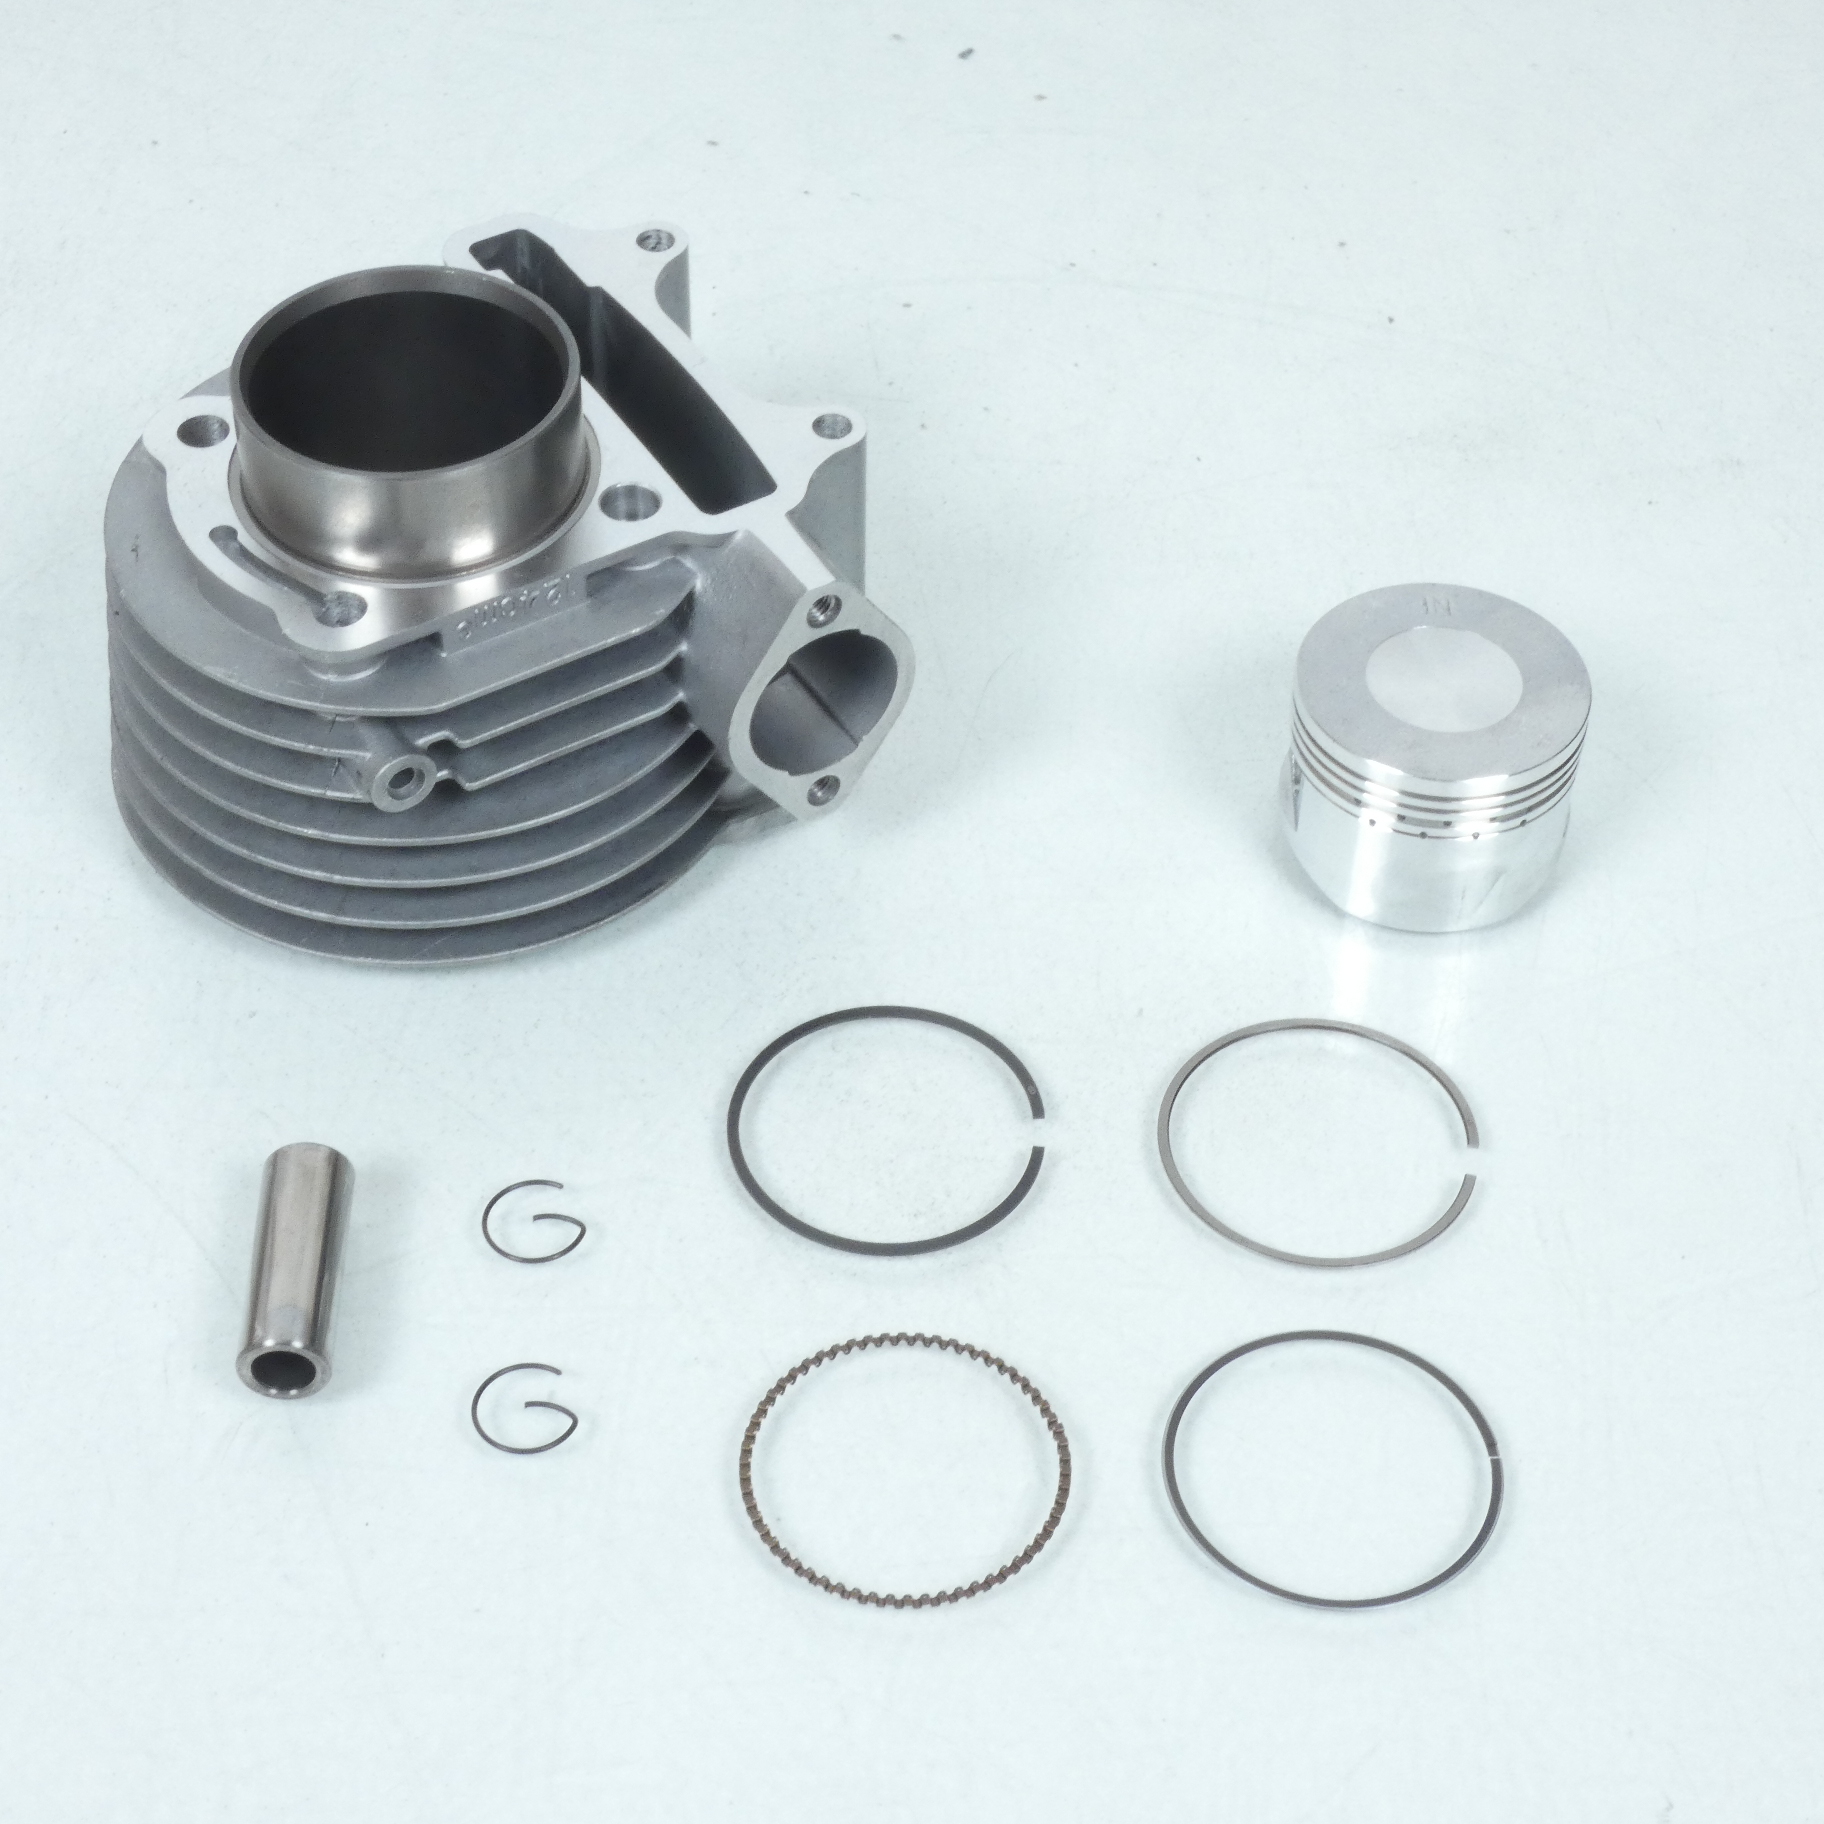 Kit Cylindre piston Ø51.8mm Sifam pour scooter Chinois 125 GY6 Axe Ø15mm Neuf